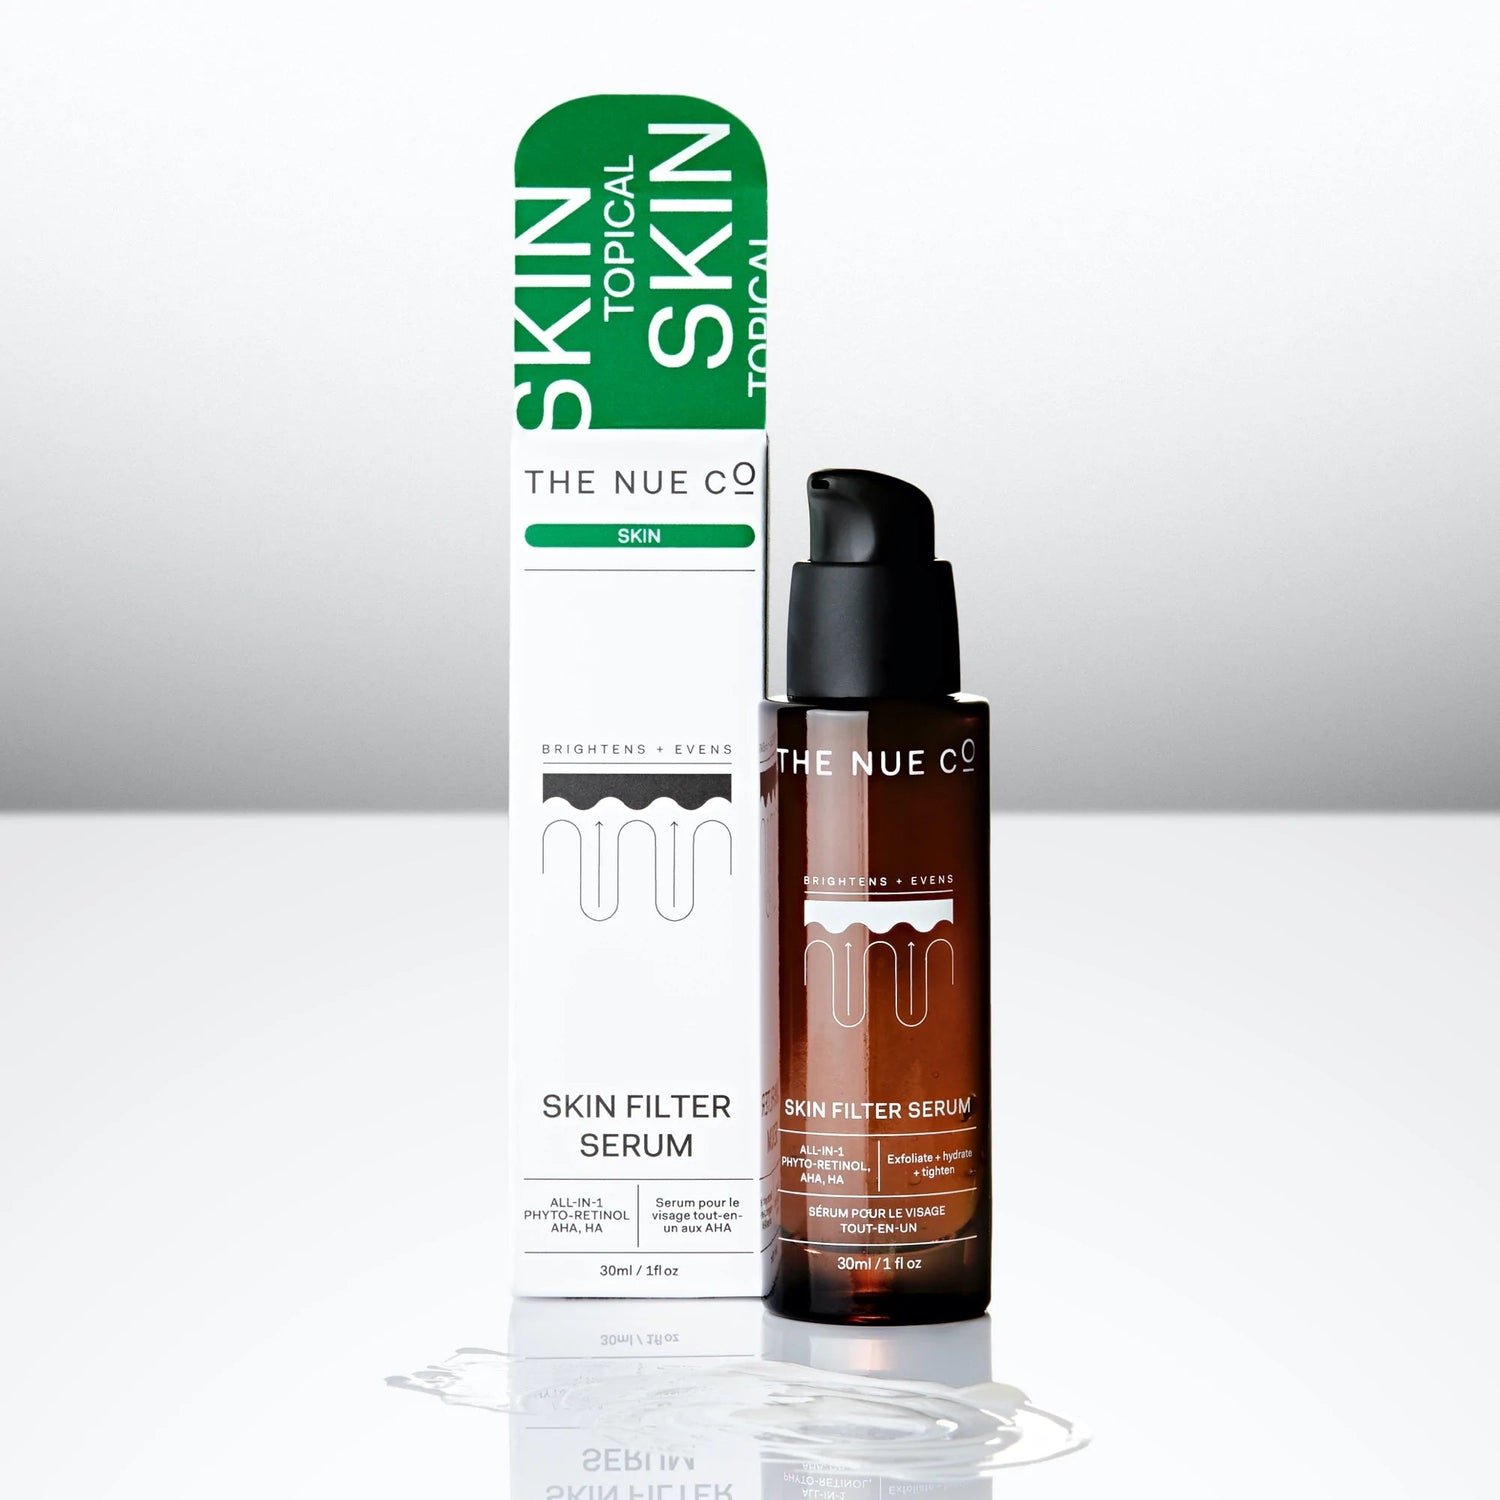 SKIN FILTER SERUM - 3 MONTH Subscription Only The Nue Co. 